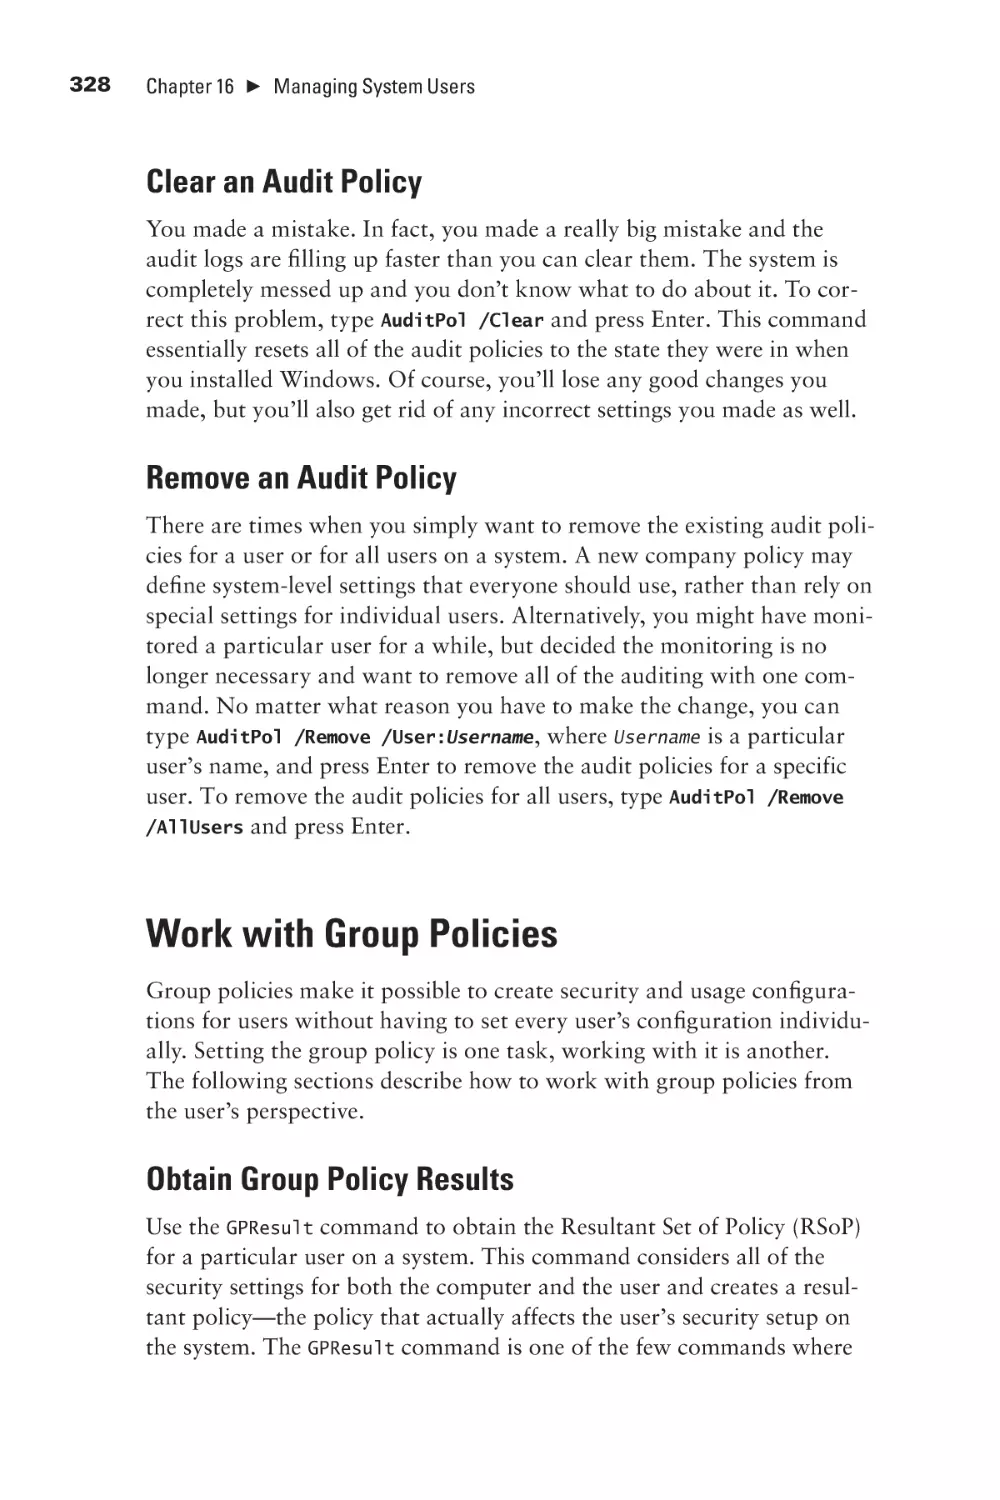 Work with Group Policies